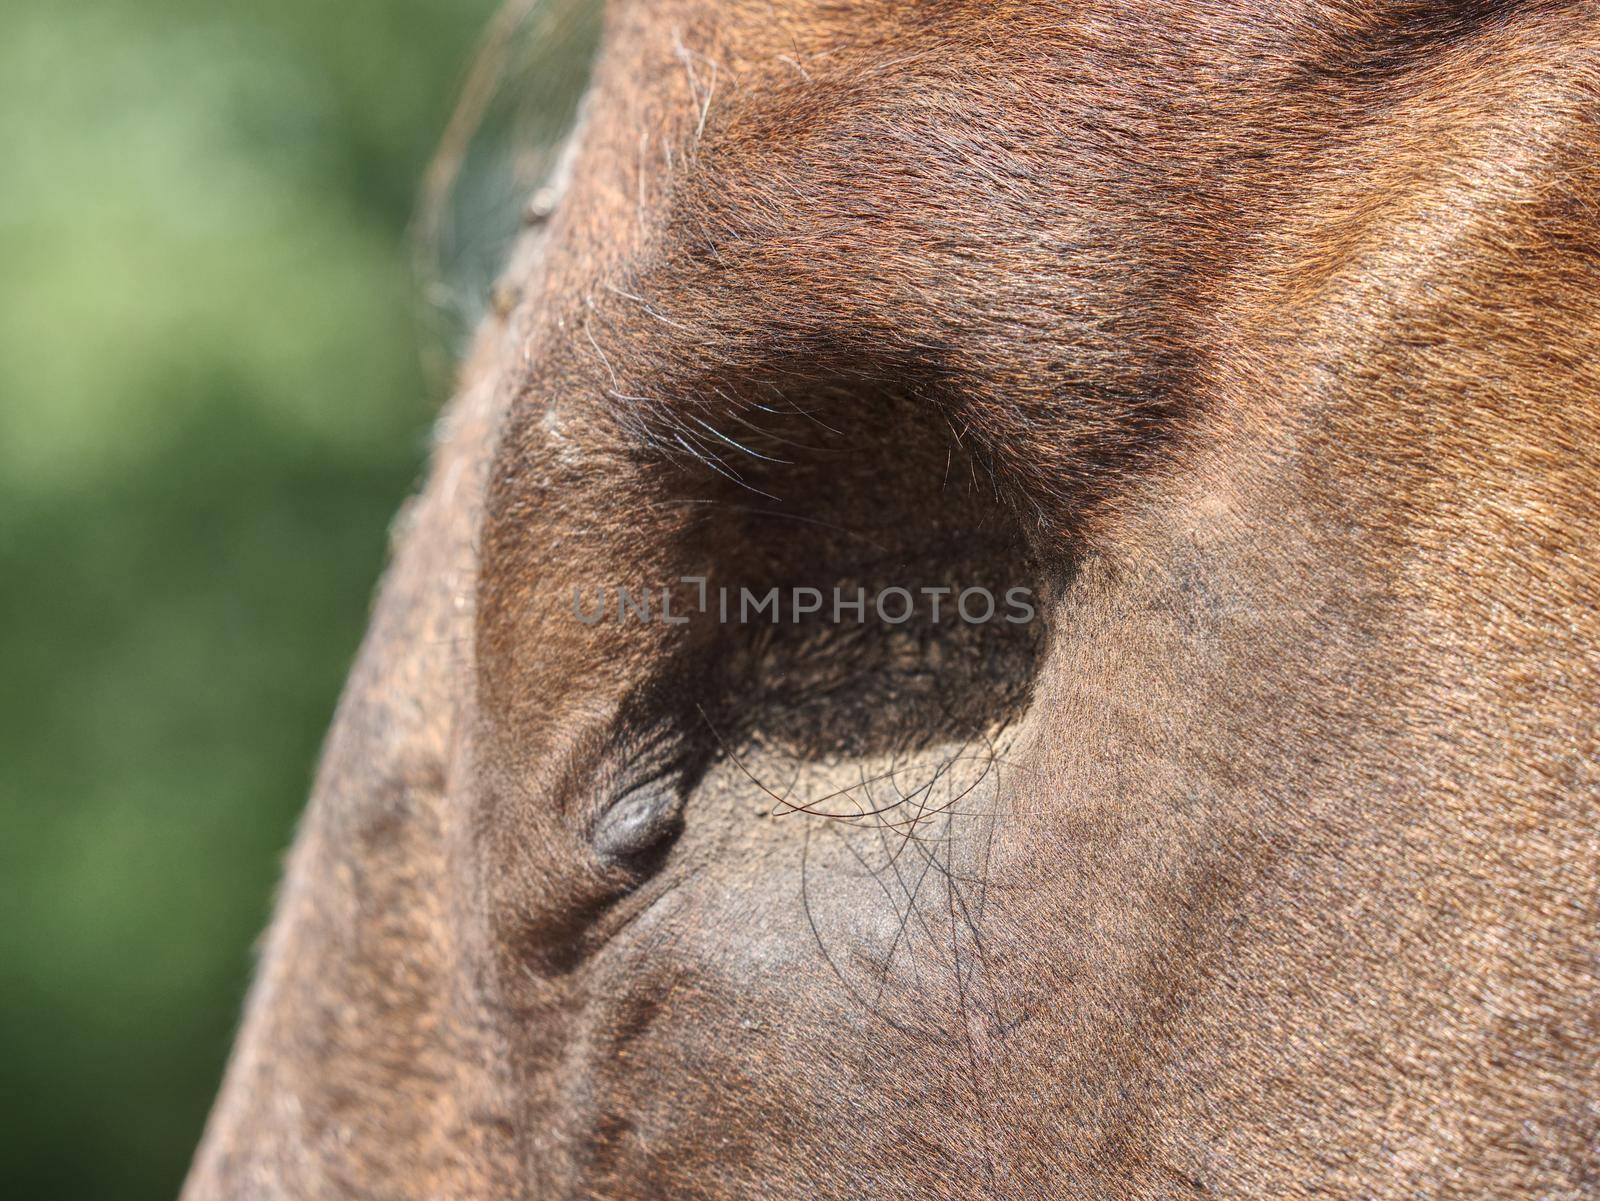 Detail of blind horse head. Horse without eye ball. The eye missing